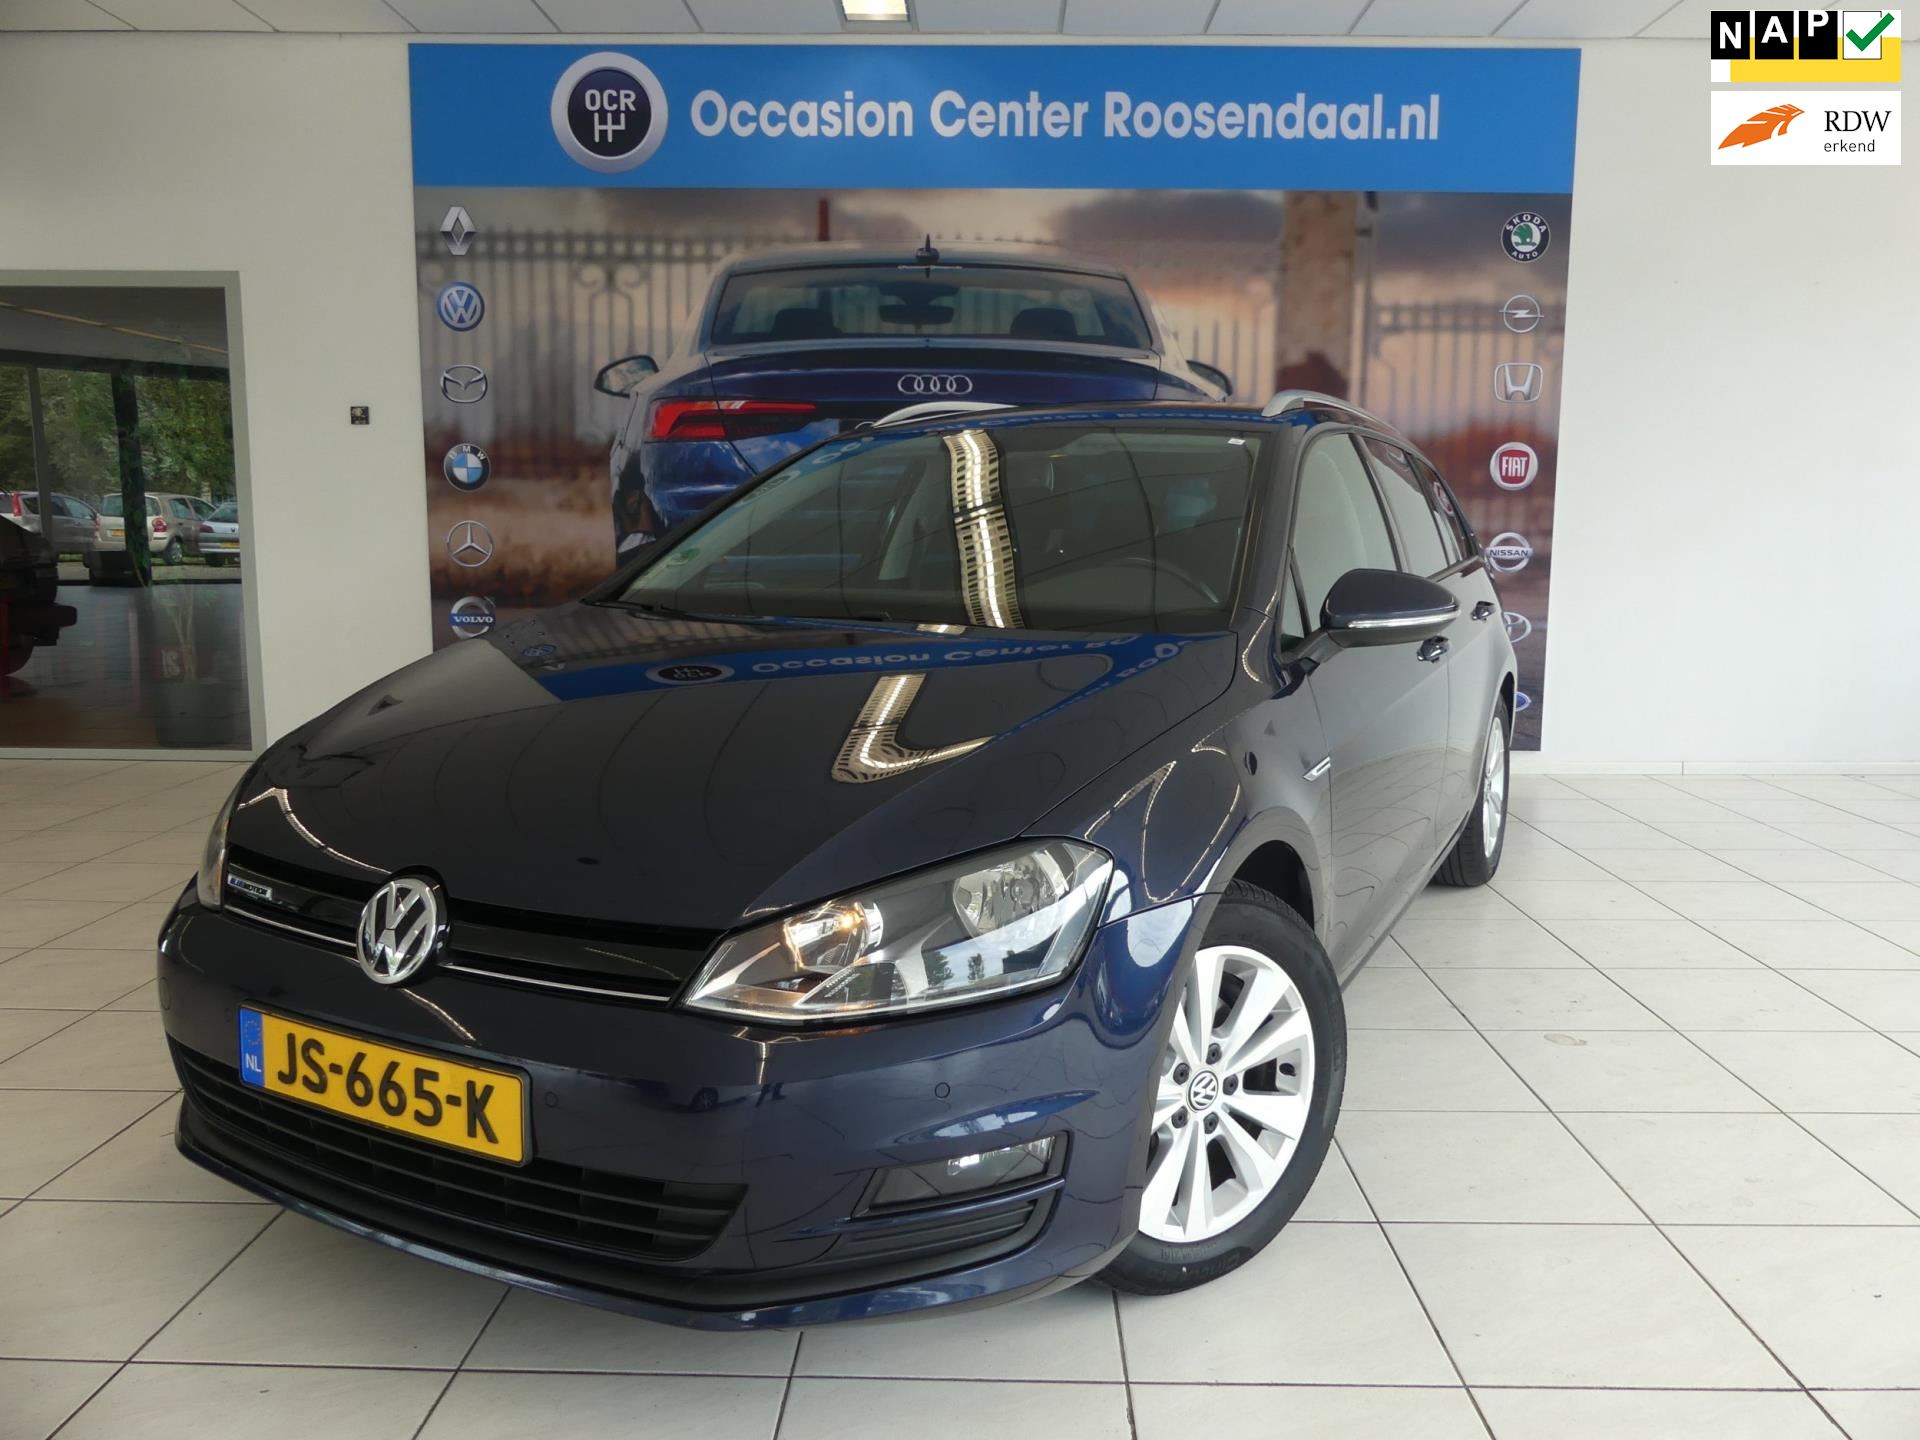 Volkswagen Golf Variant occasion - Occasion Center Roosendaal